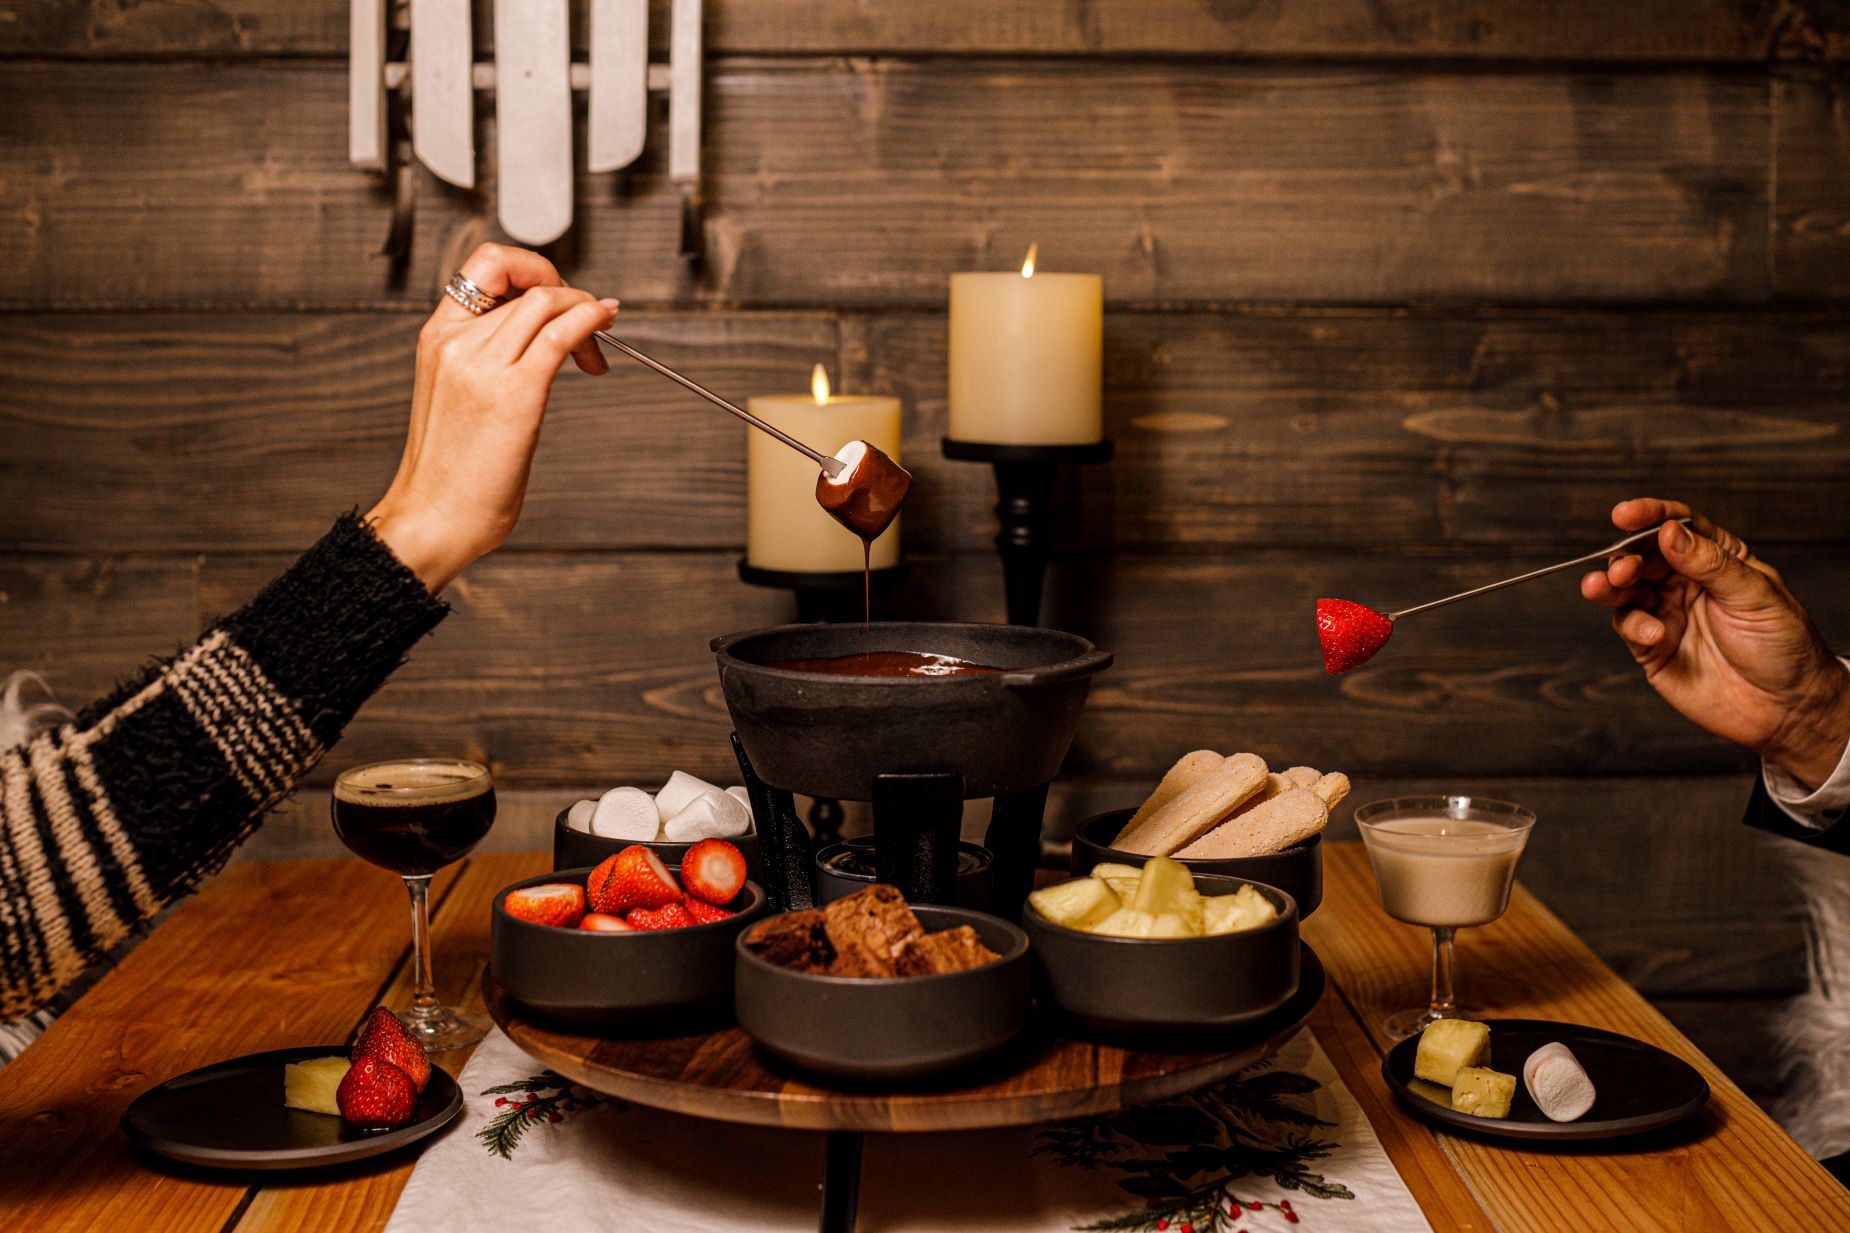 An image of two people eating chocolate fondue with fruit and marshmallows.